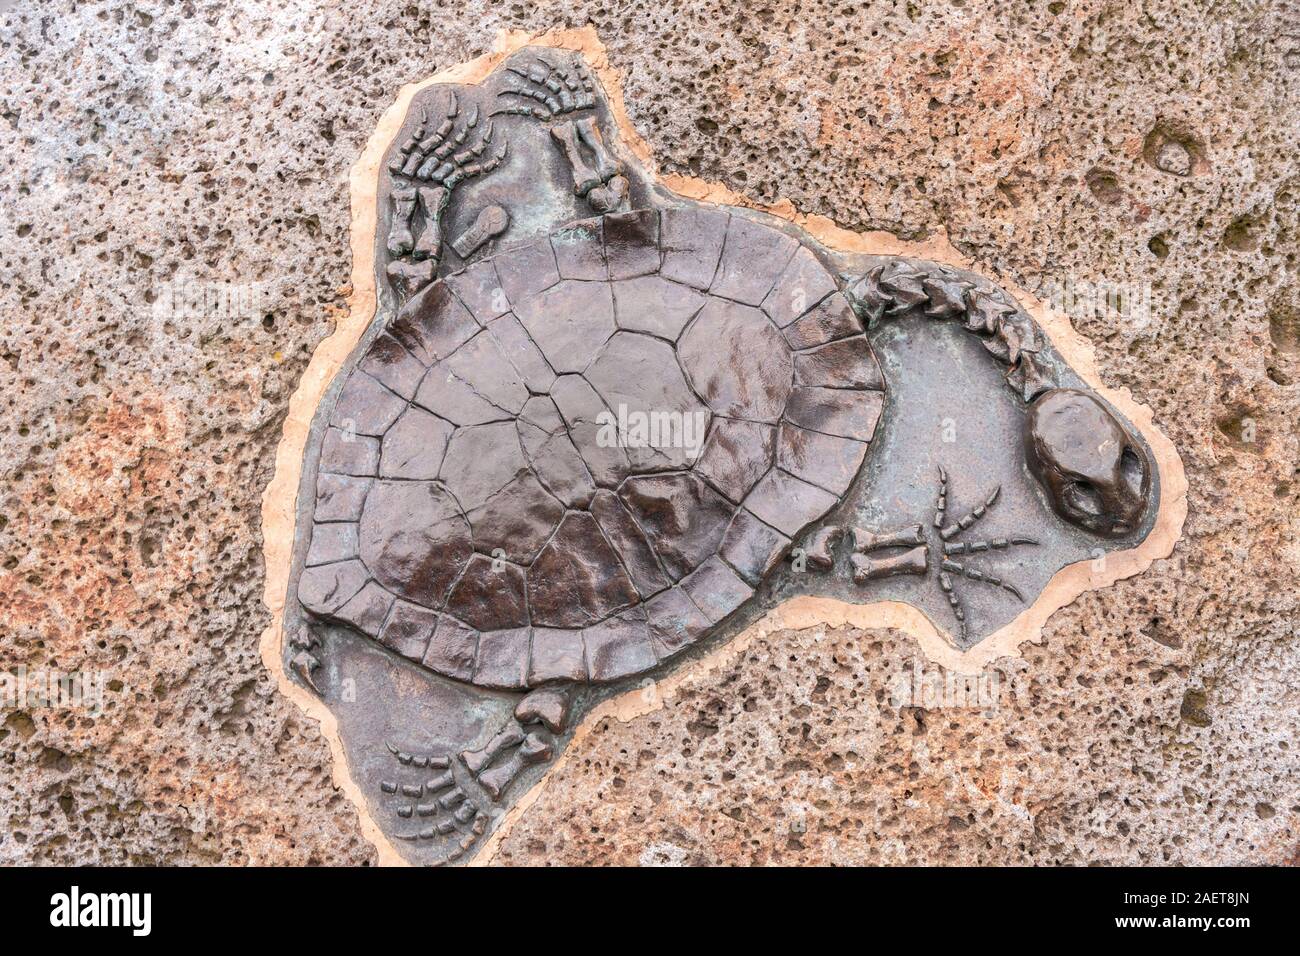 Melbourne, Australia - November 16, 2009: Closeup of Skeleton of turtle with spread legs set in beige brown stone in park. Stock Photo